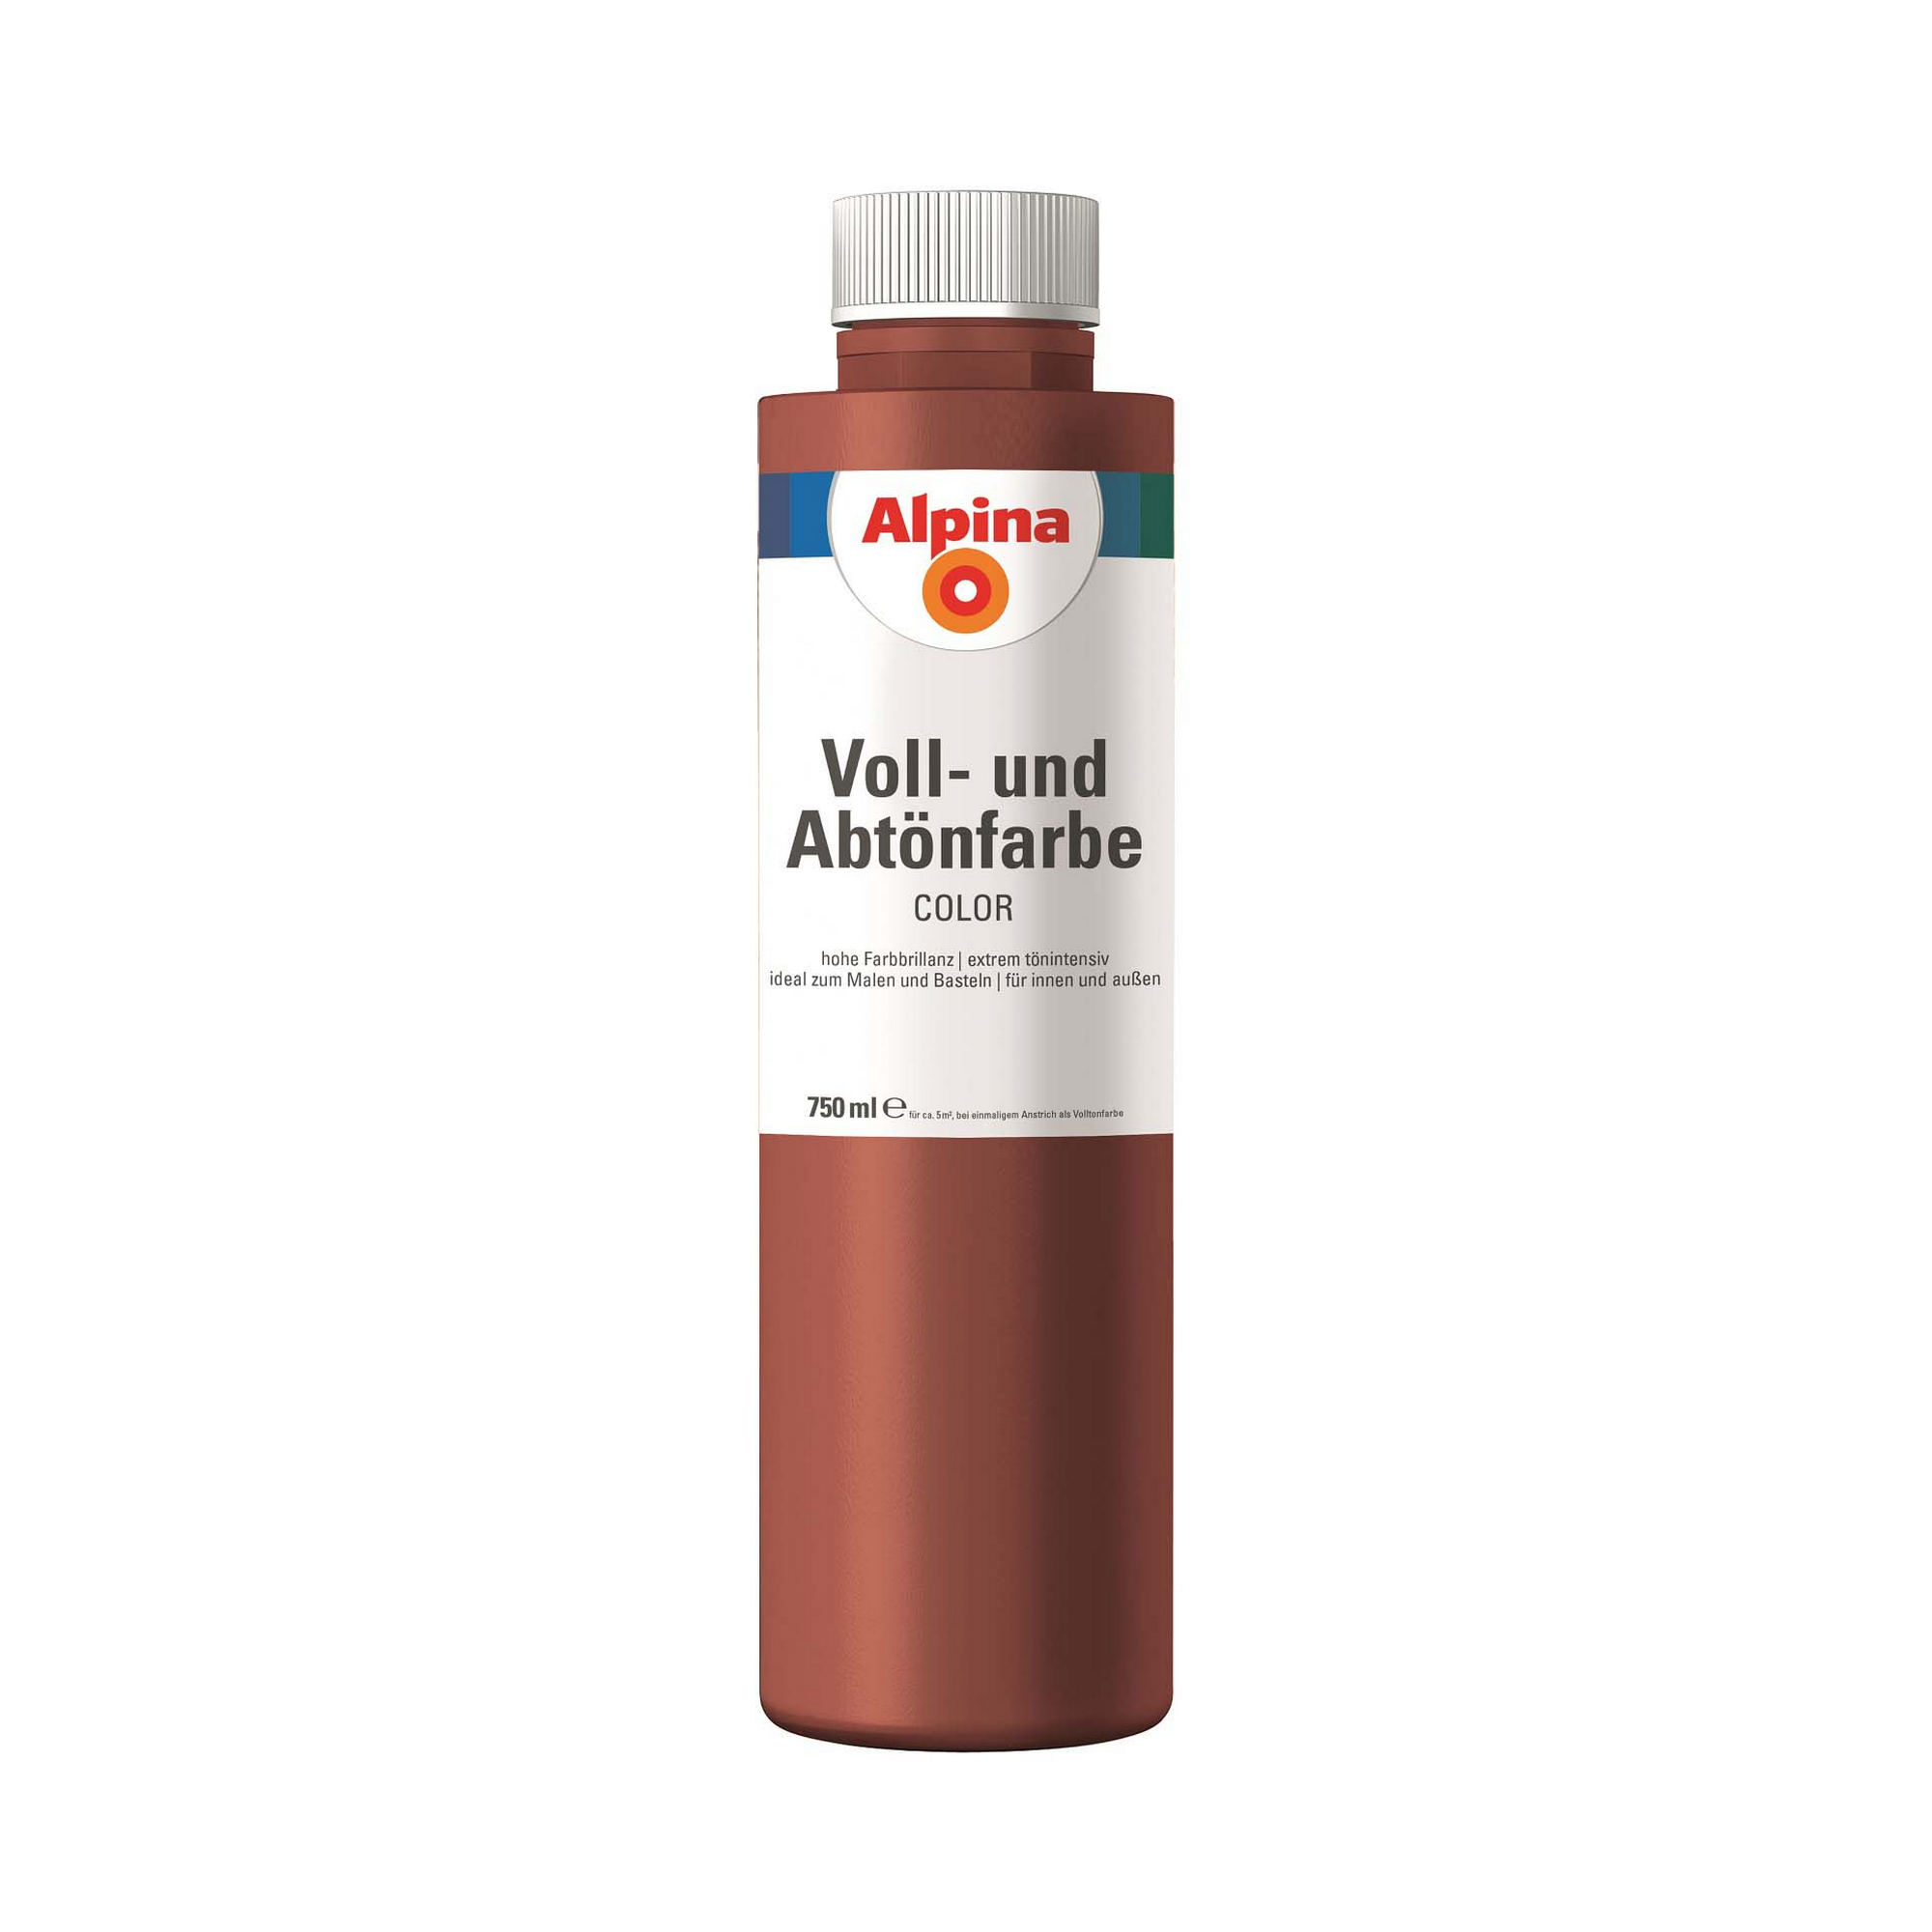 Voll- und Abtönfarbe 'Spicy Red' rotbraun 750 ml + product picture